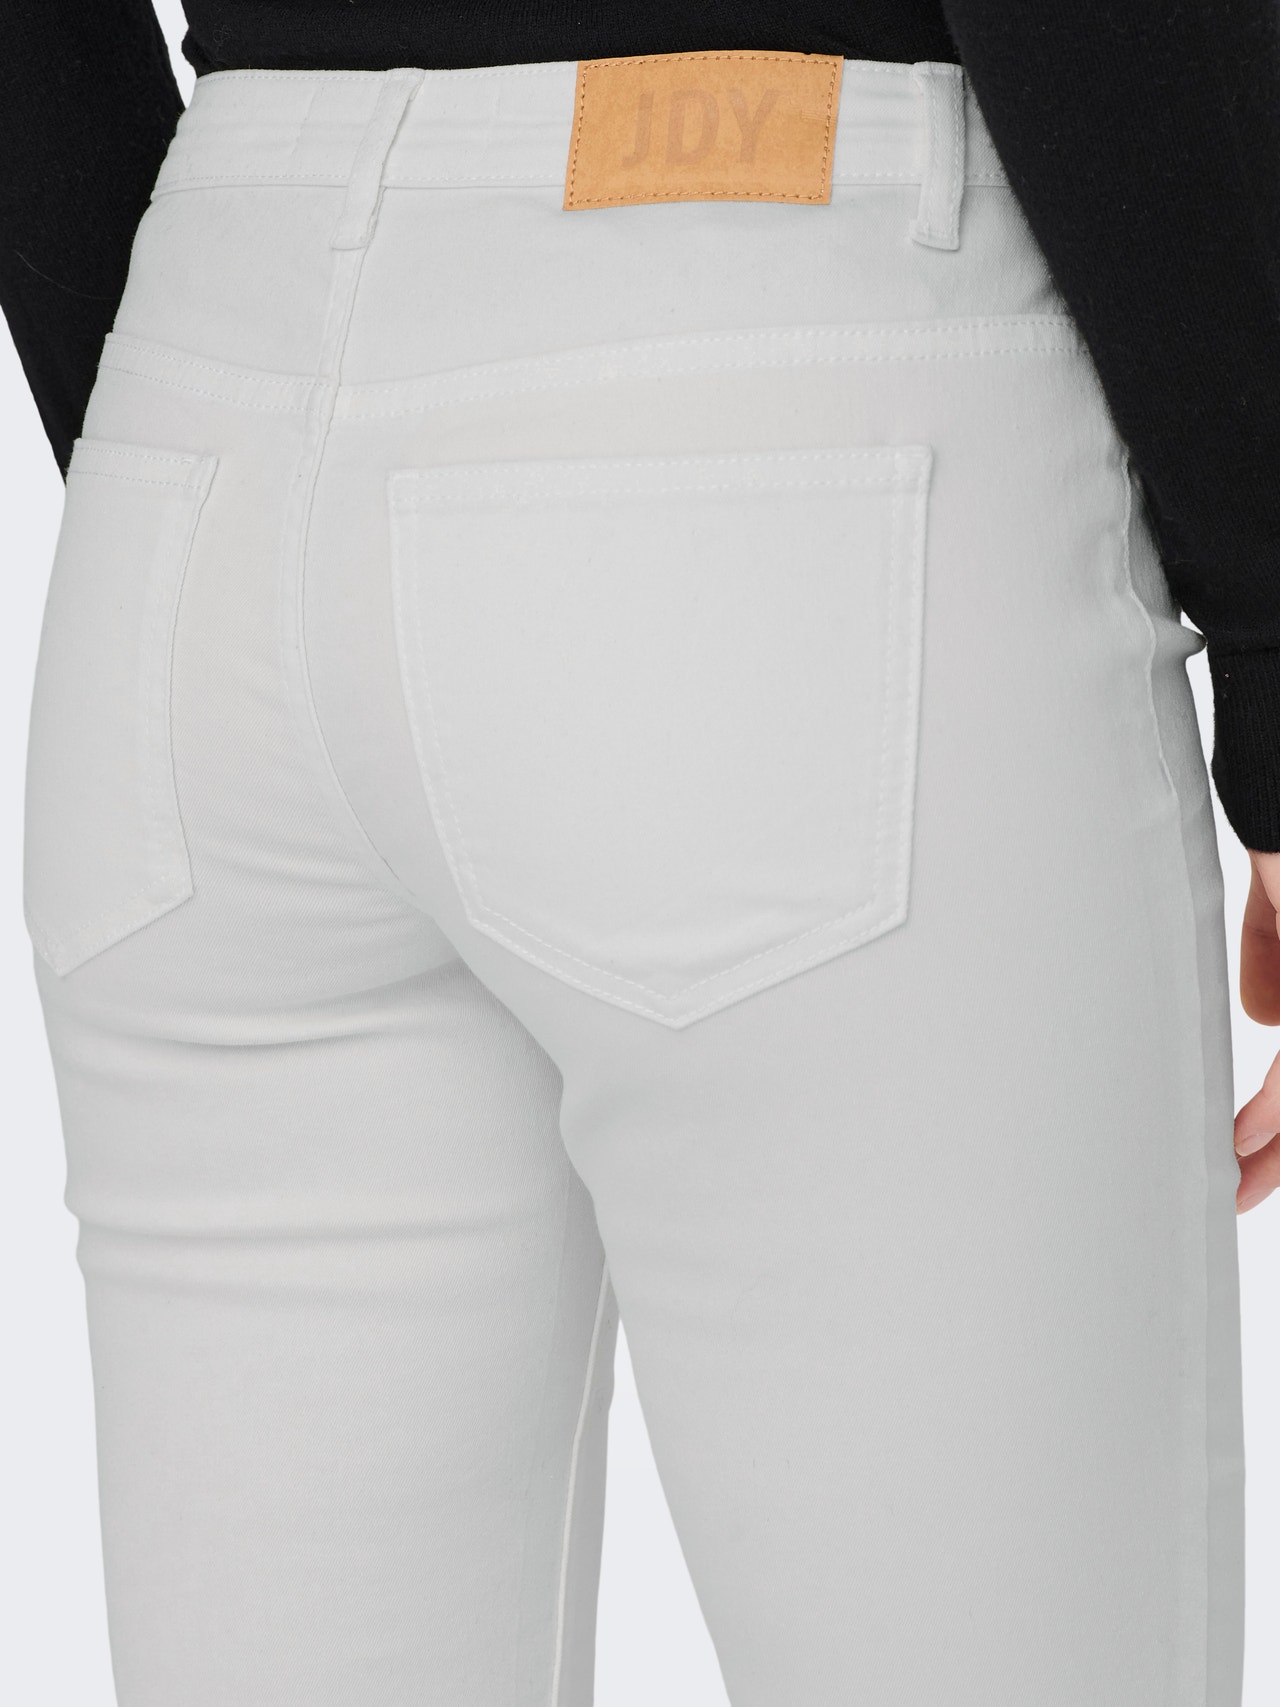 ONLY Jeans Skinny Fit Taille classique -White - 15271705